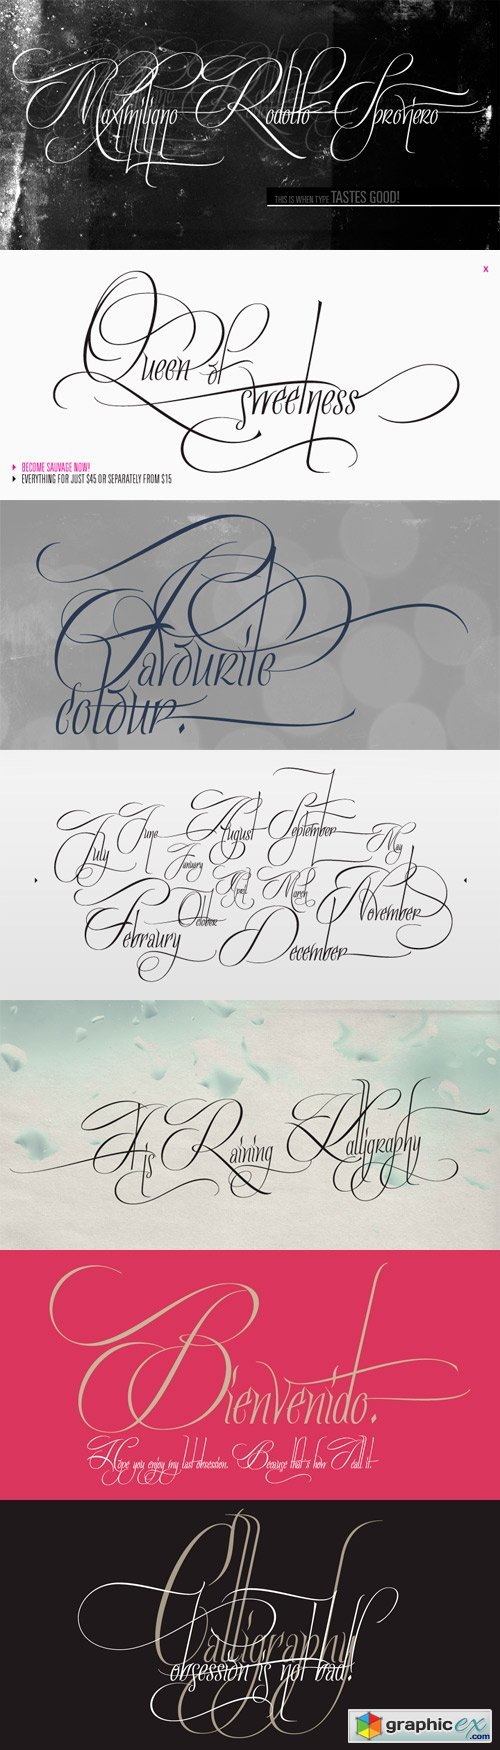 Quijote Sauvage Font Family - 8 Fonts for